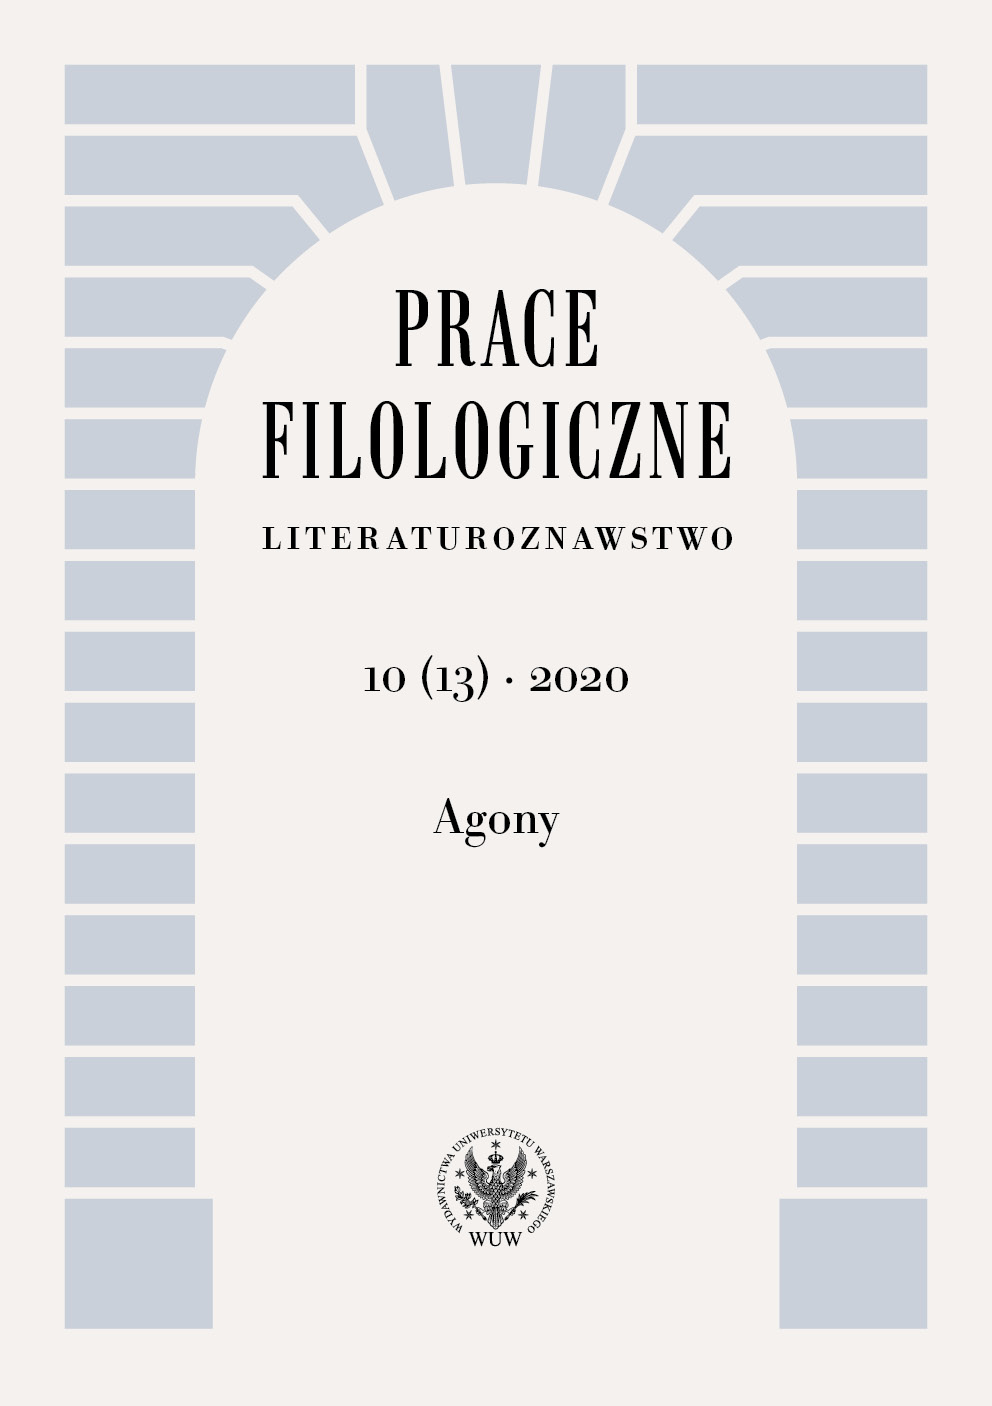 Intensifying the Agon: A Comment on the Confrontation between Józef Albin Herbaczewski and Tadeusz Miciński Cover Image